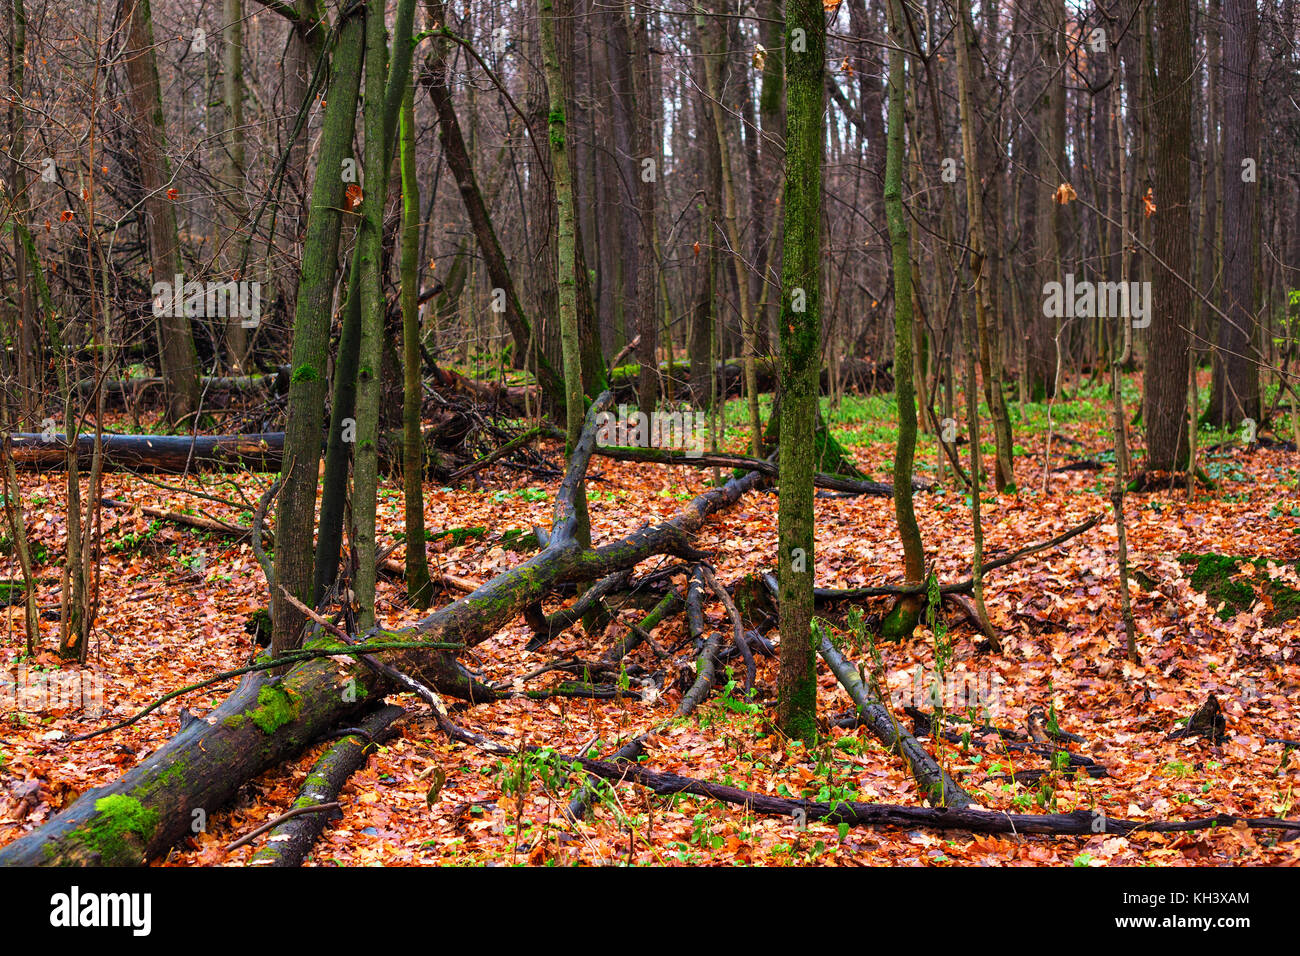 The autumn wood with the tumbled-down rotten trees. Cloudy day of November, wet fallen leaves and a green moss on trees Stock Photo